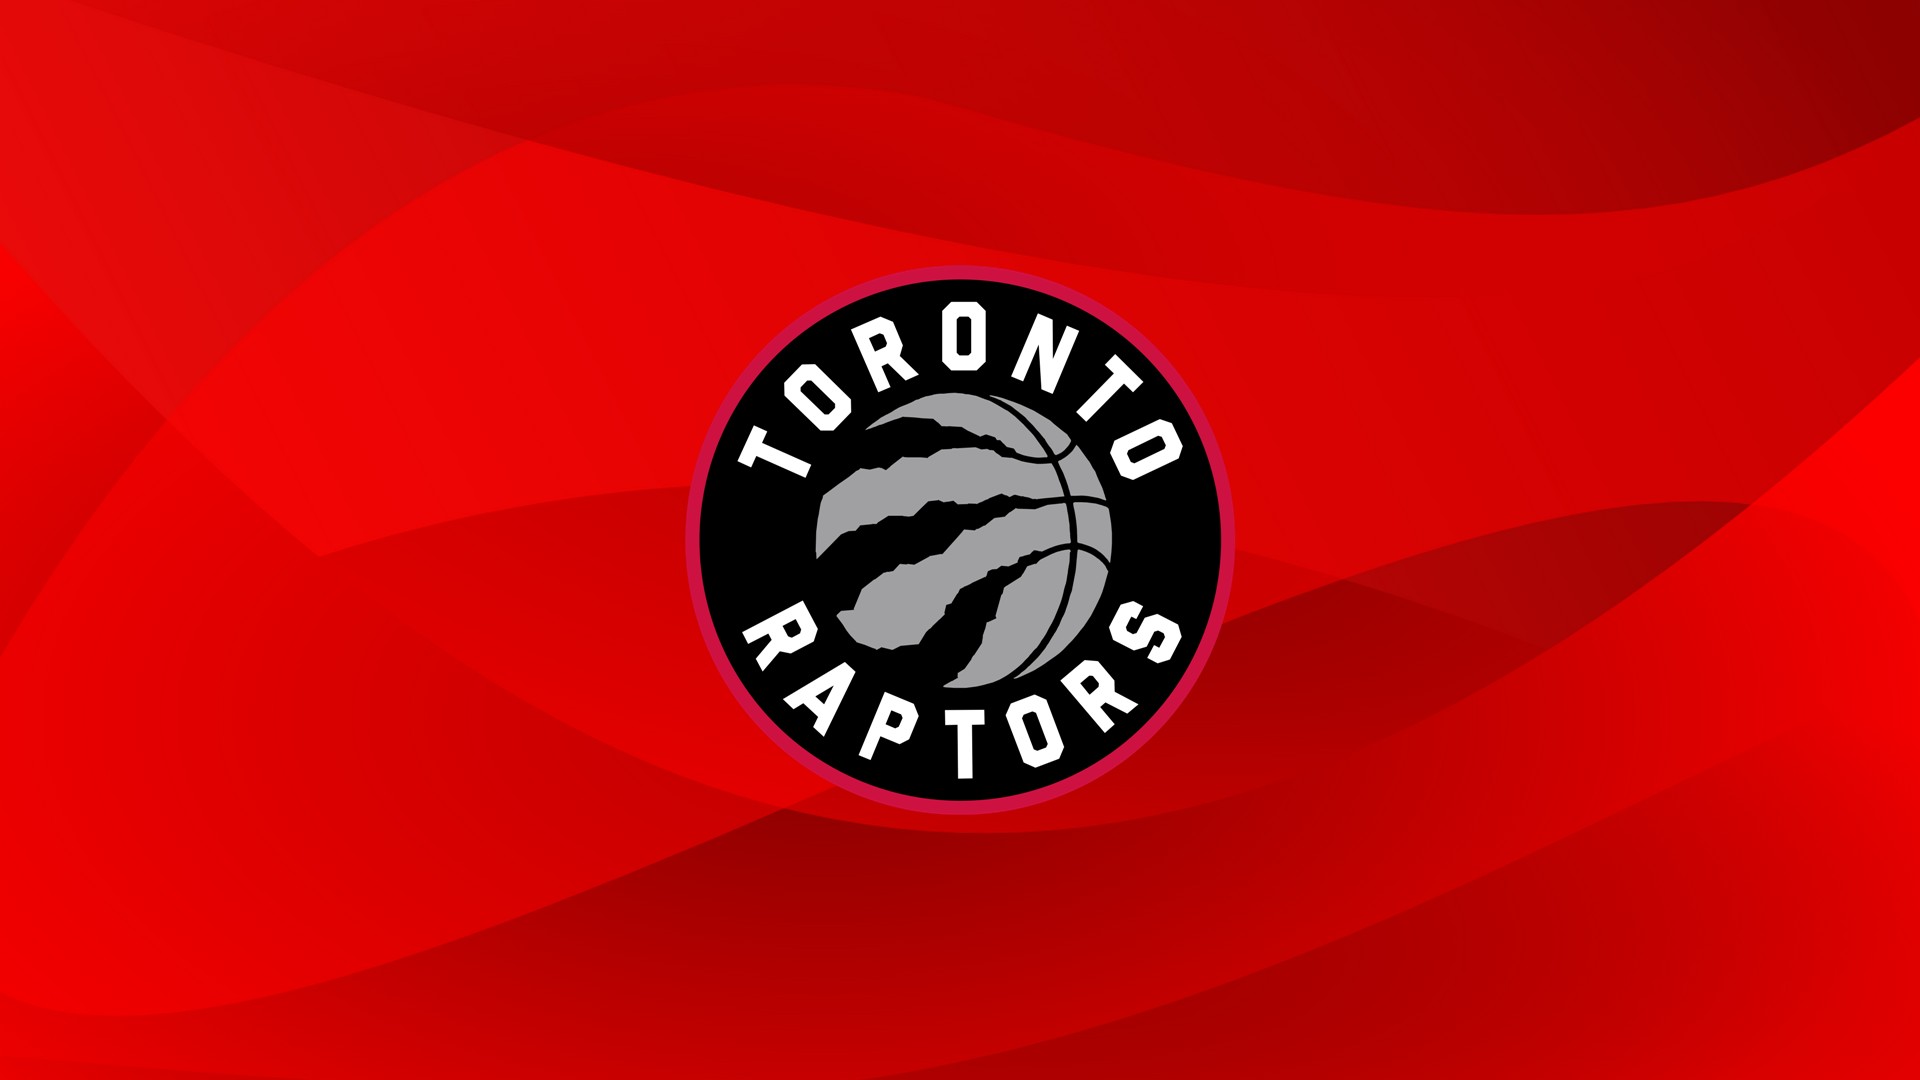 Basketball Toronto Wallpaper For Mac Backgrounds with image dimensions 1920x1080 pixel. You can make this wallpaper for your Desktop Computer Backgrounds, Windows or Mac Screensavers, iPhone Lock screen, Tablet or Android and another Mobile Phone device